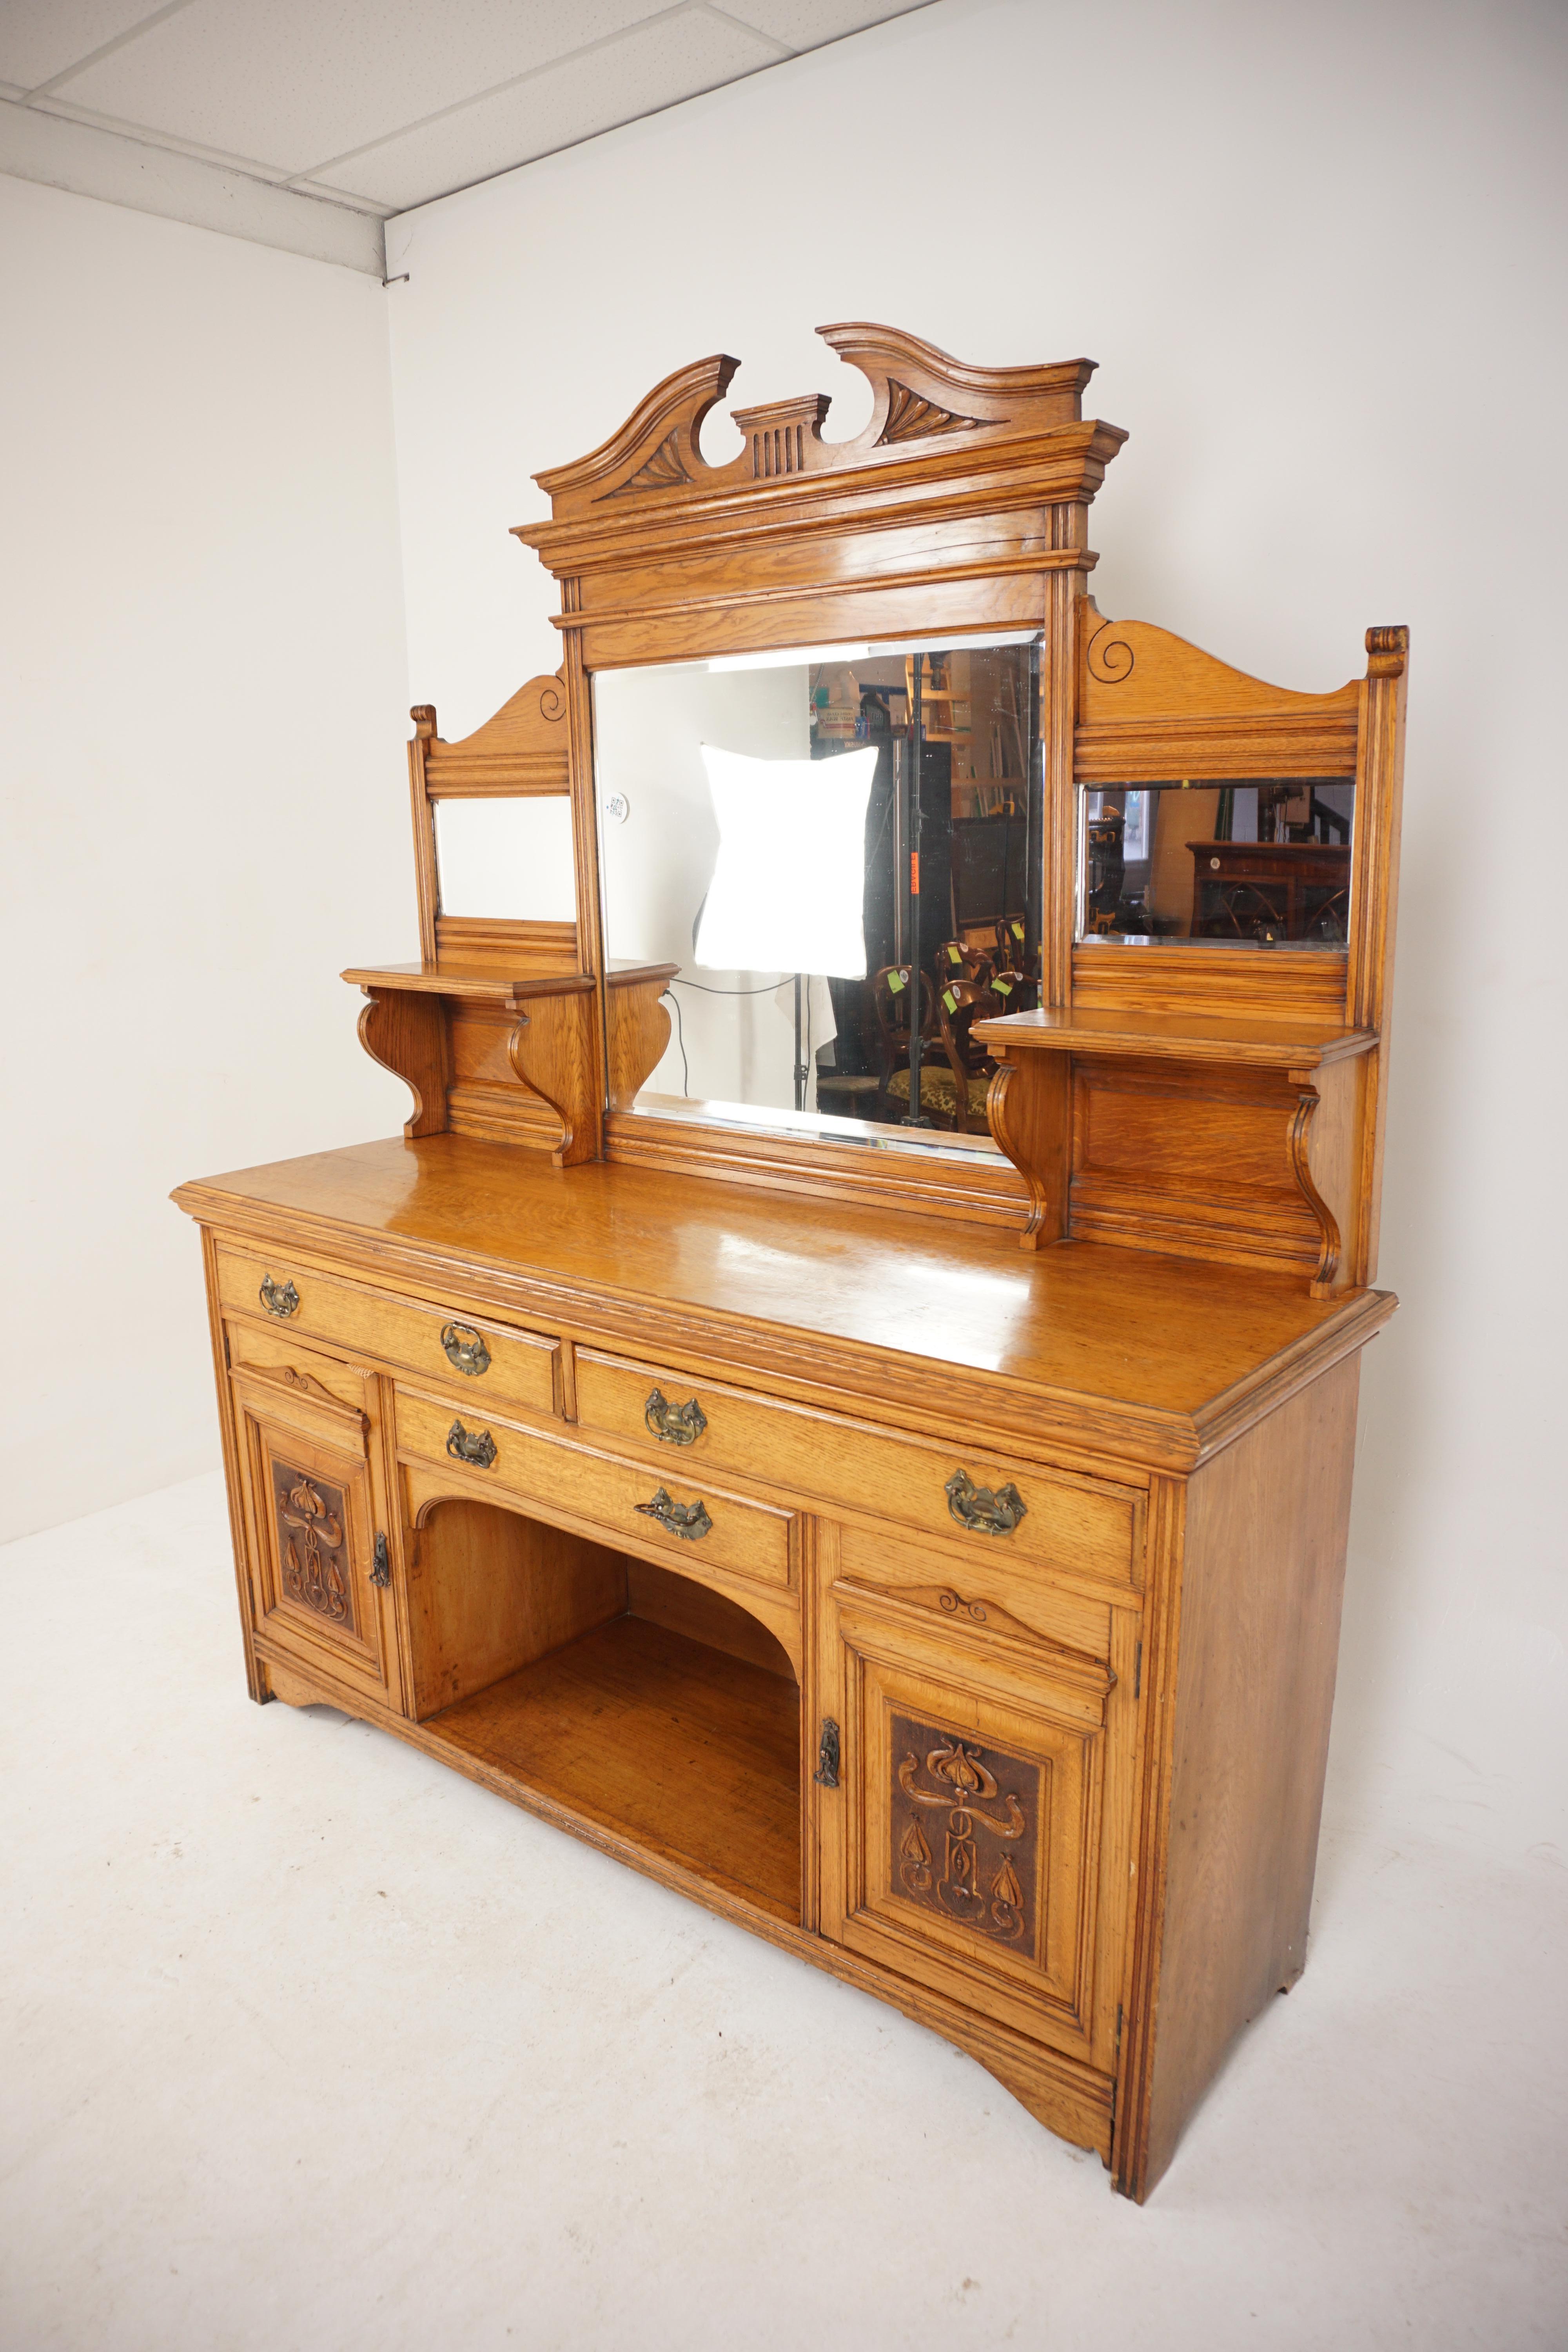 Victorian carved oak mirror back sideboard buffet, Scotland 1890, H607

Scotland 1890
Solid oak
Original finish
The sideboard comes into two sections
The top has a large central bevelled mirror flanked by a smaller shaped mirror on each